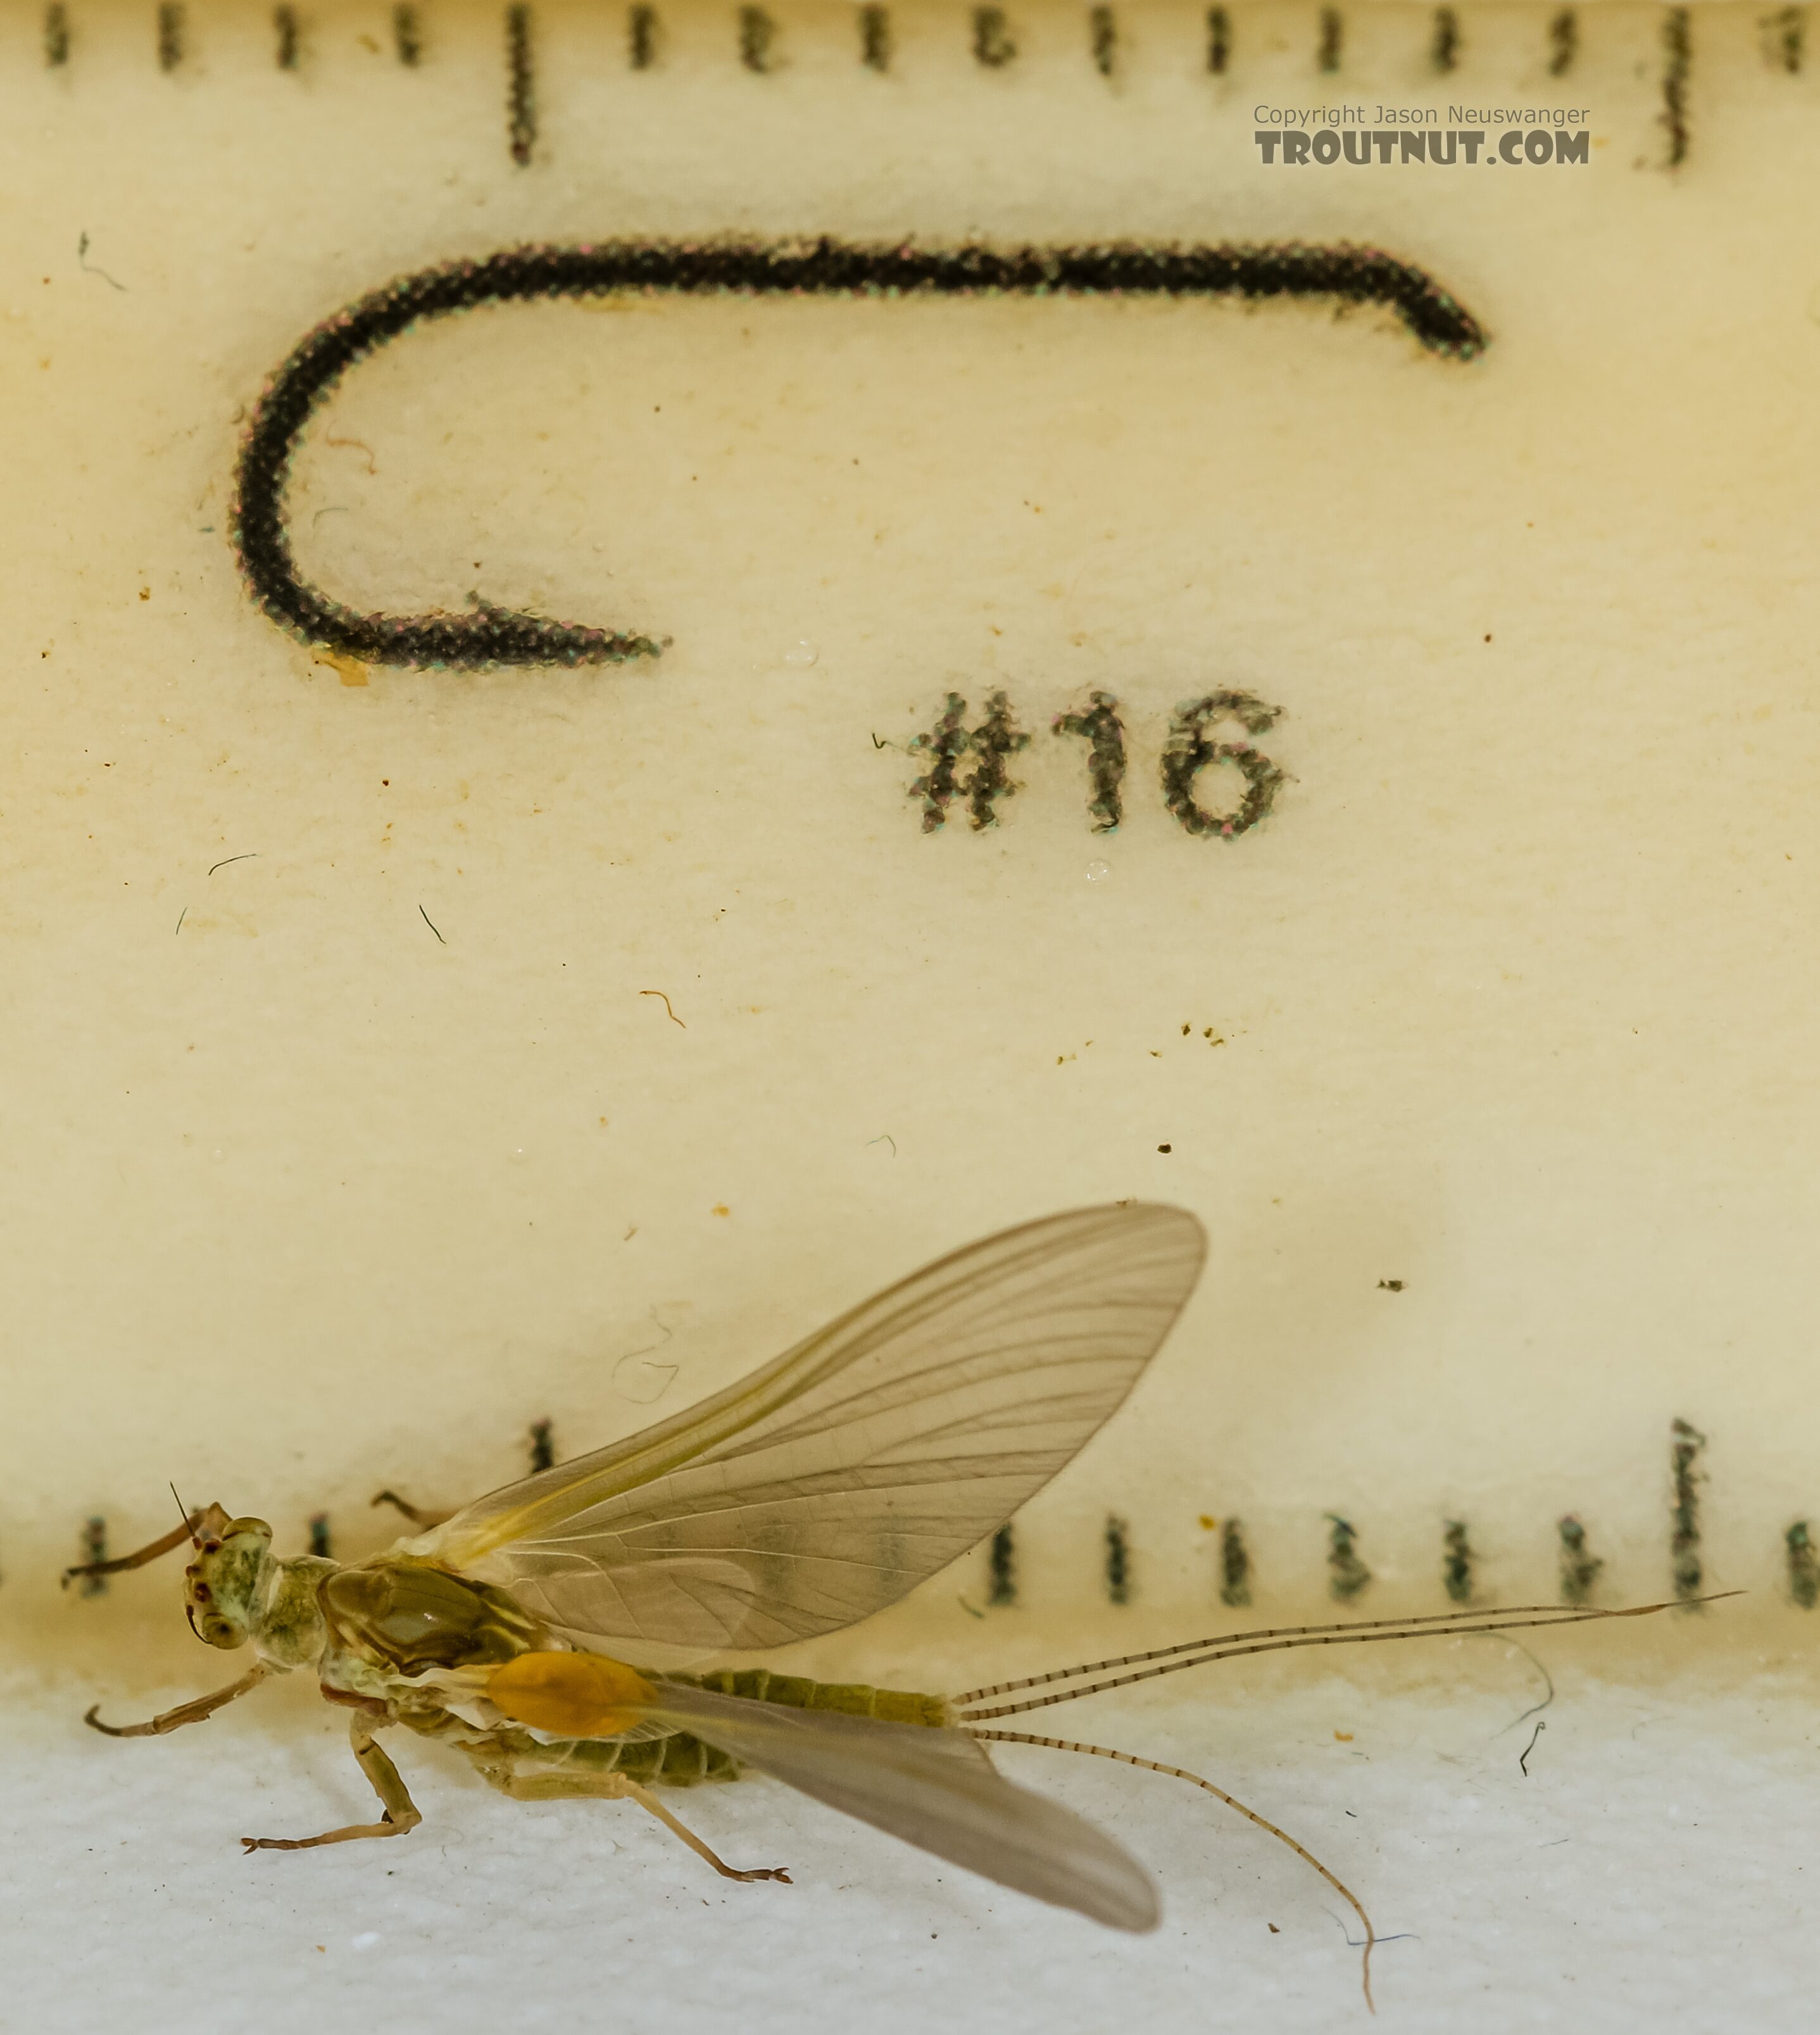 Female Ephemerella excrucians (Pale Morning Dun) Mayfly Dun from the Henry's Fork of the Snake River in Idaho